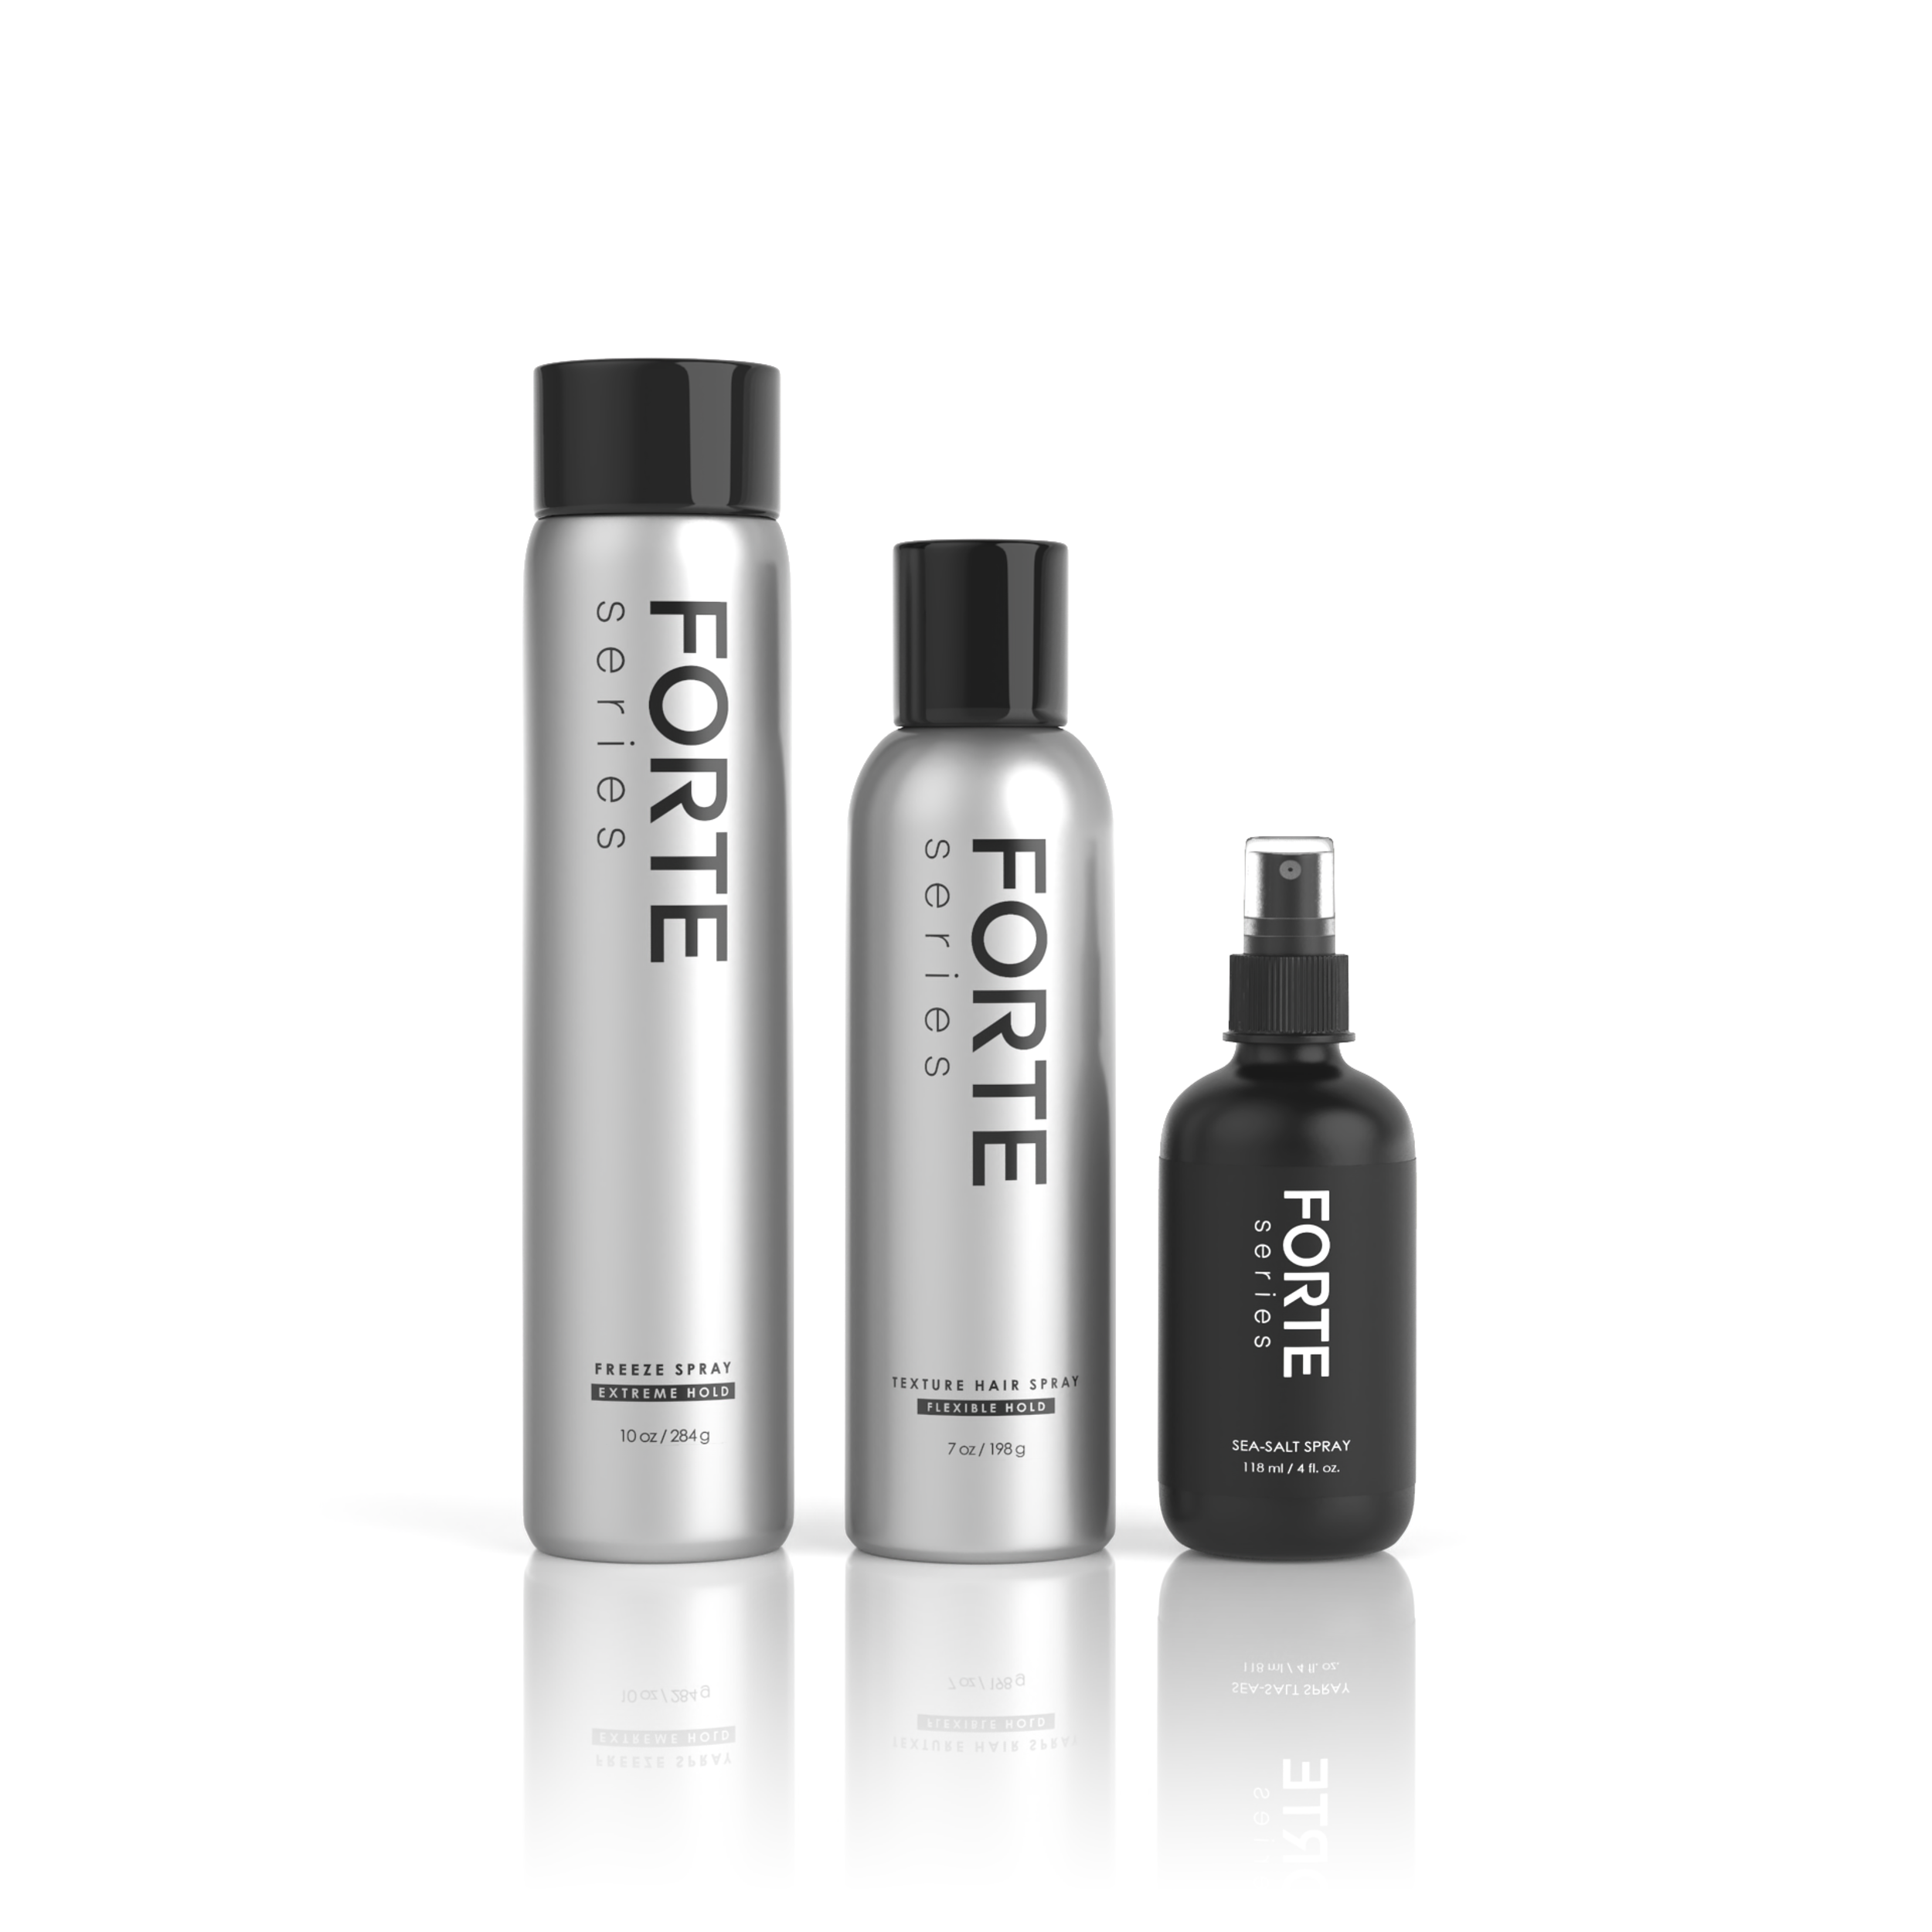 Forte Series Spray Collection